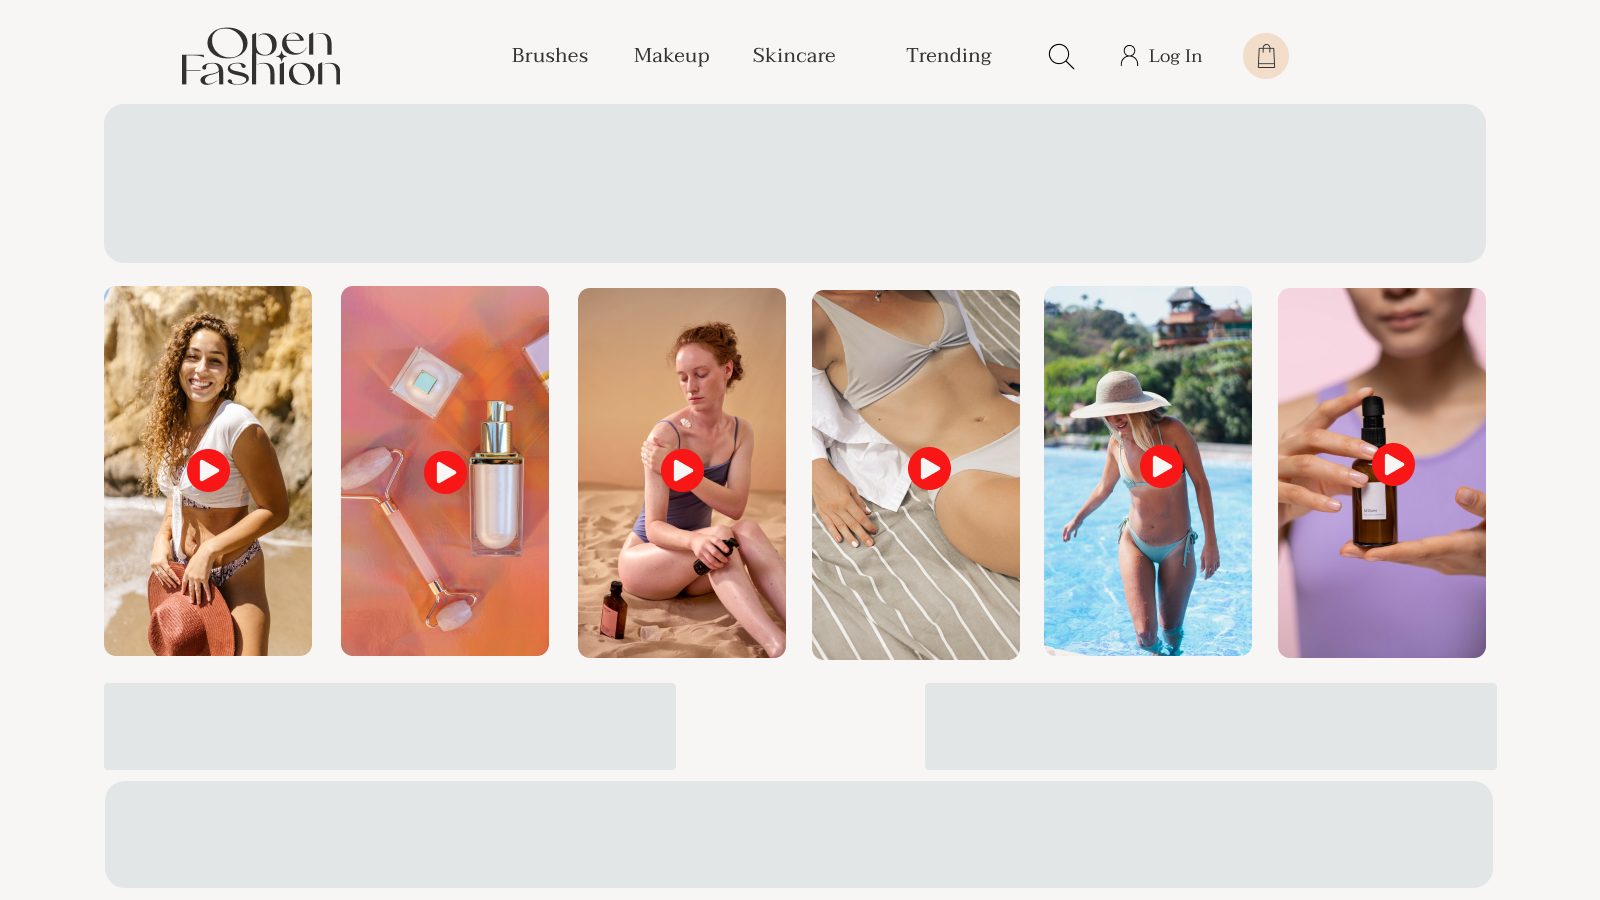 Shoppable videos in a carousel format for ecommerce websites